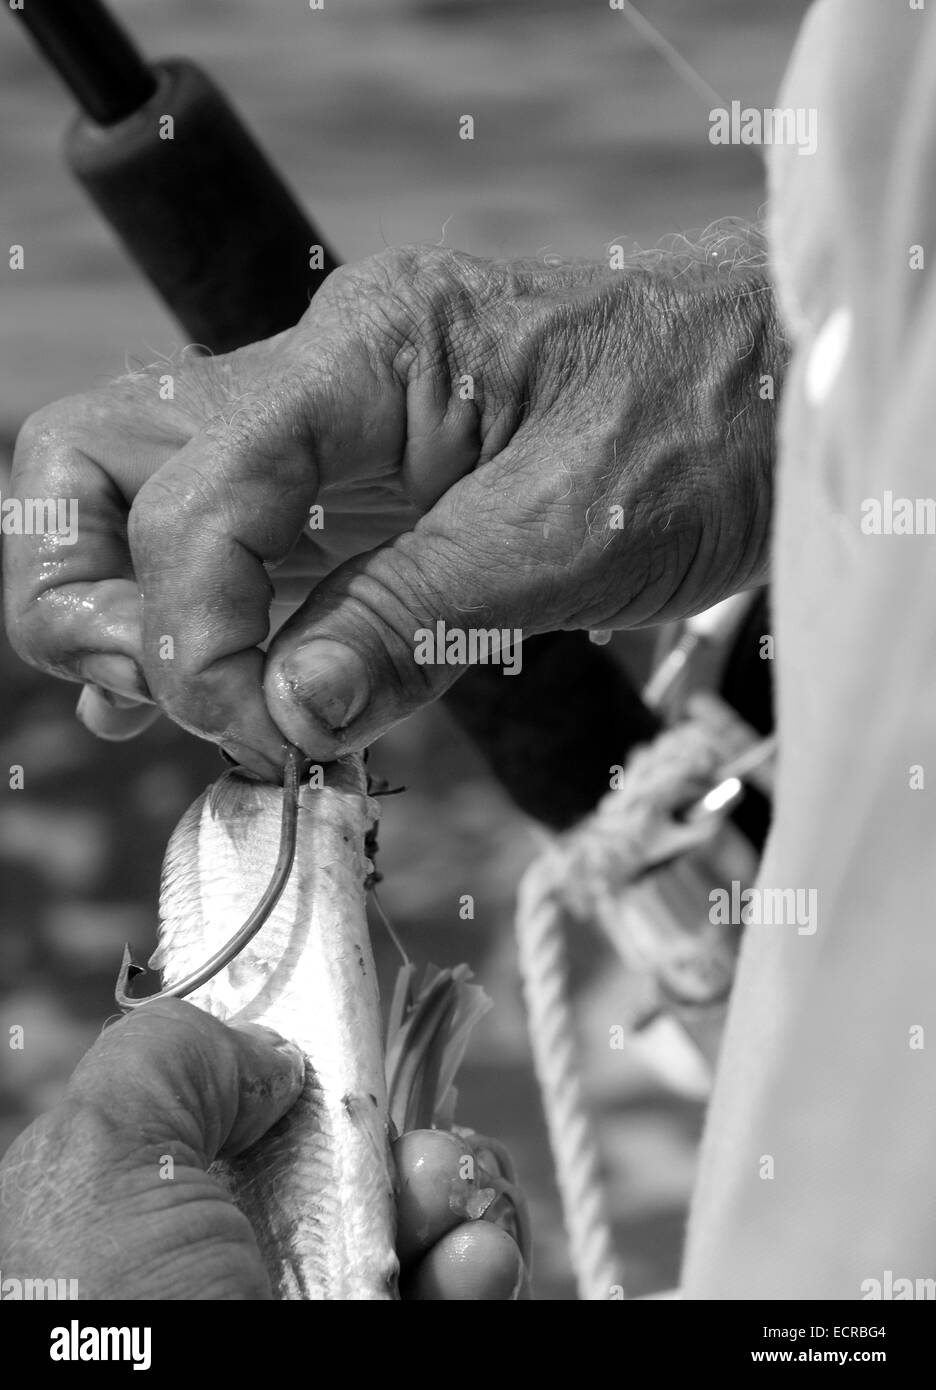 Fish hook Black and White Stock Photos & Images - Alamy